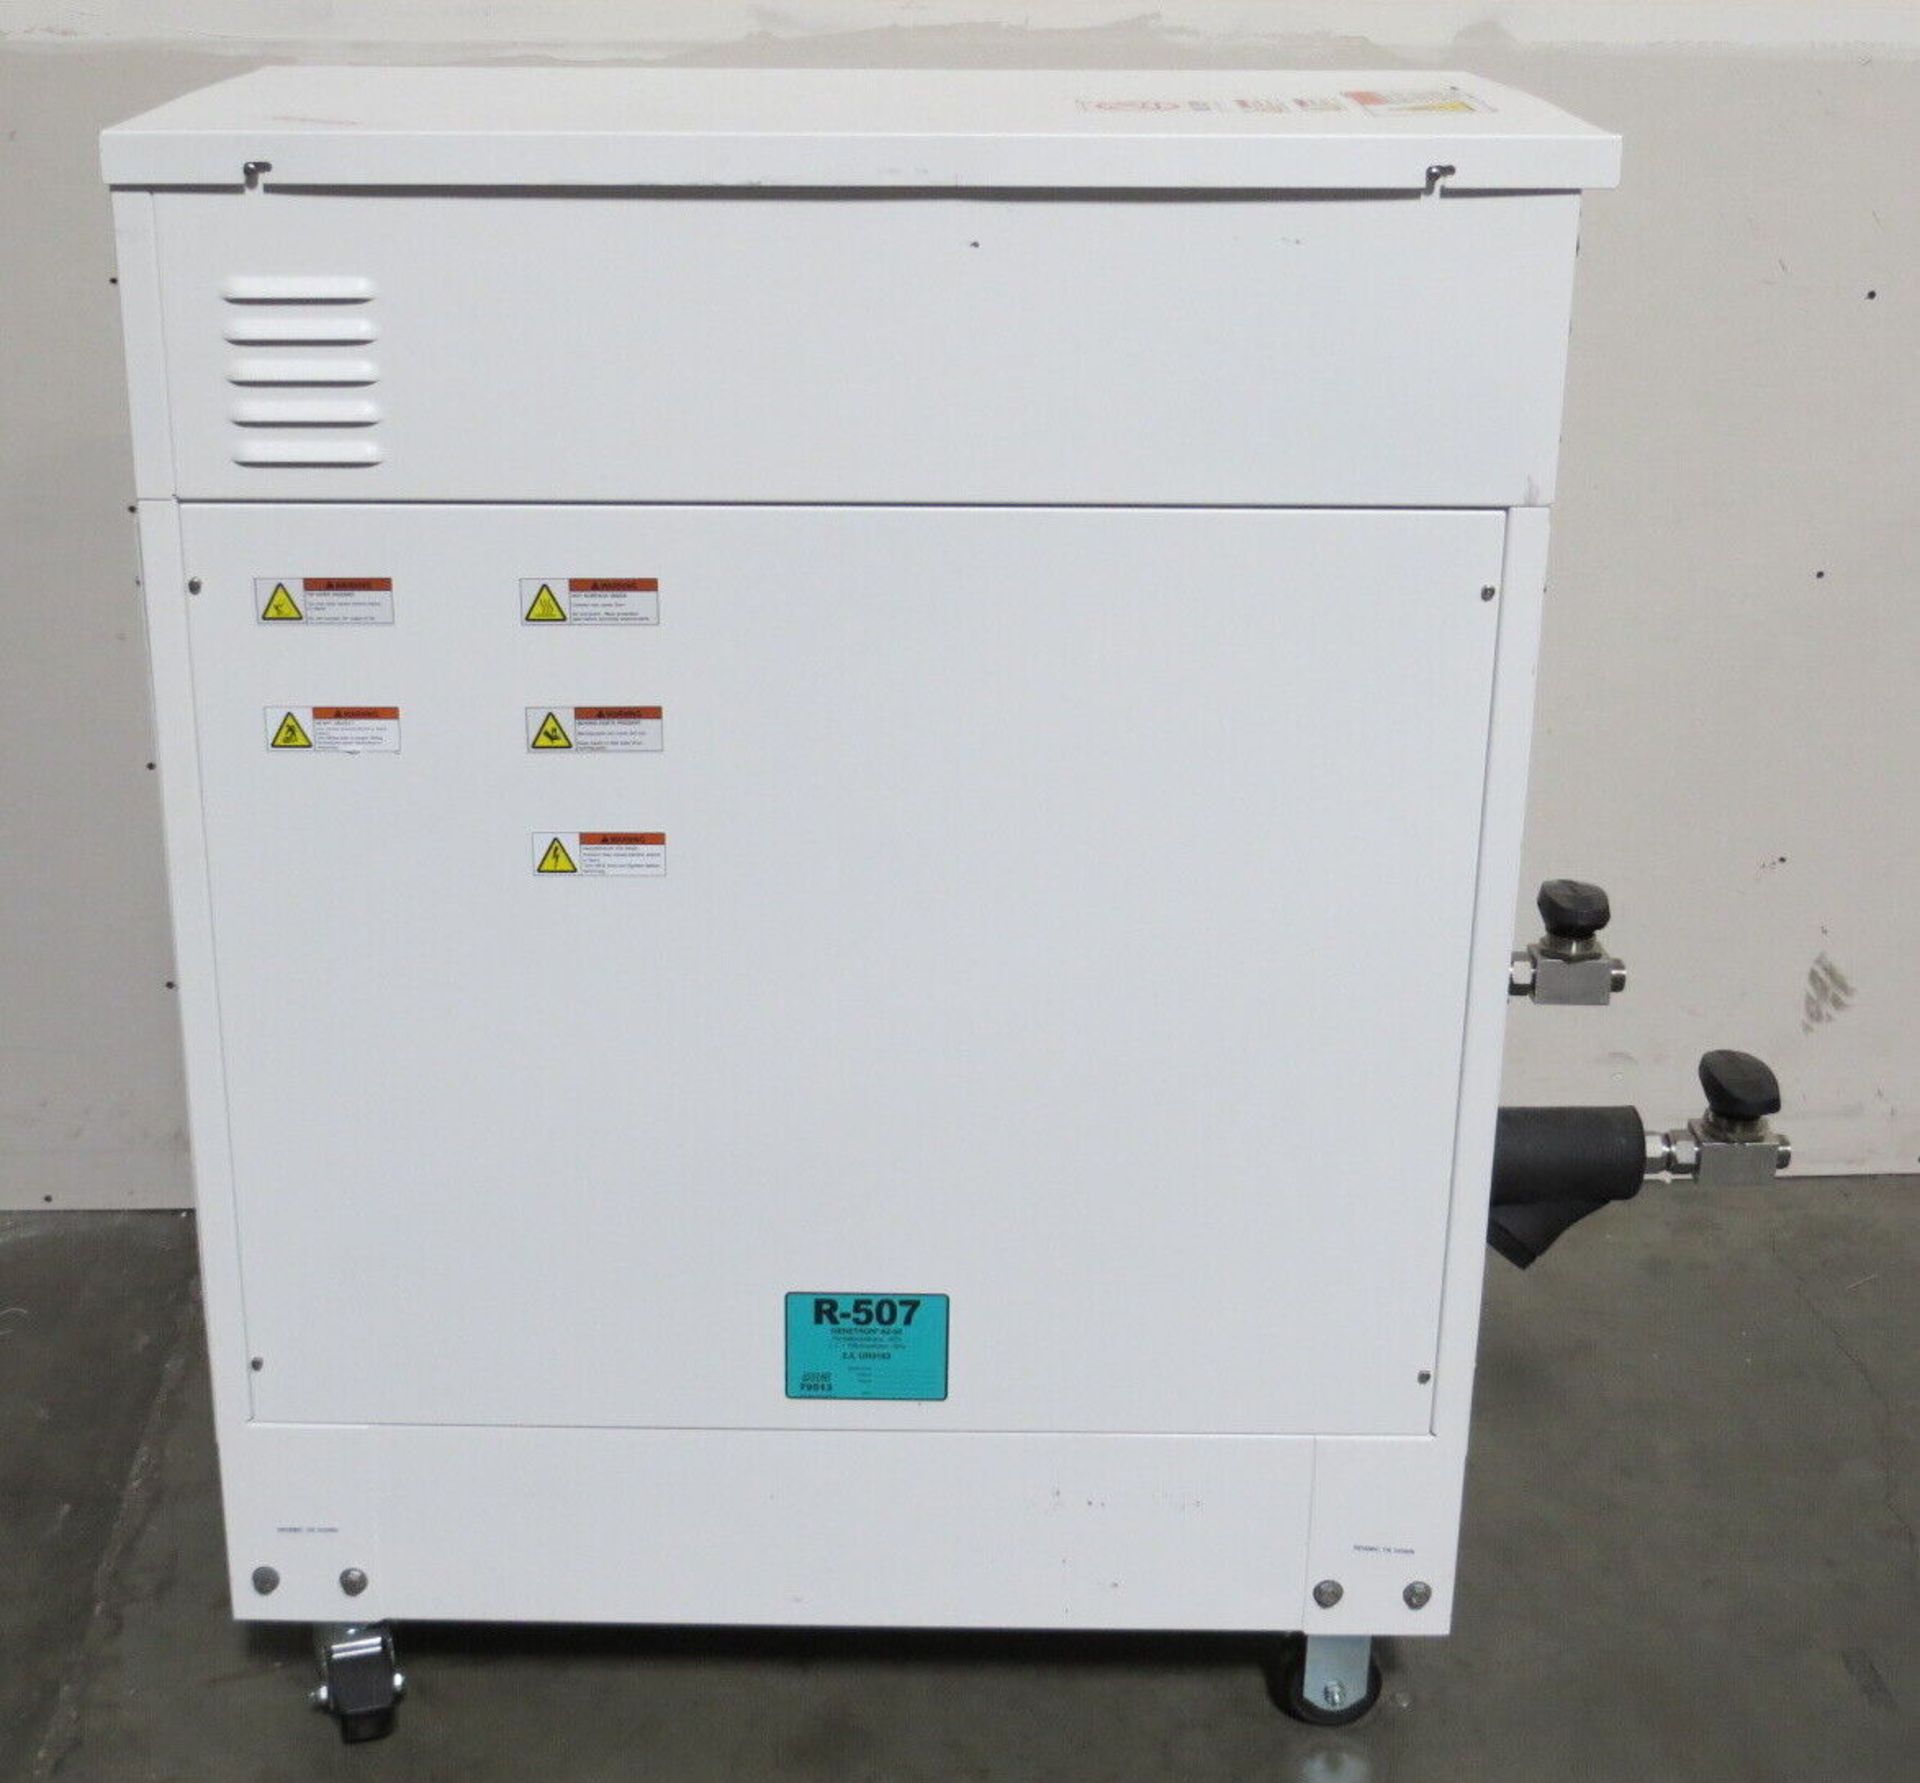 Advanced Thermal Sciences M-Pak MP-17B Chiller 4090093-001 R2 - Gilroy - Image 8 of 10